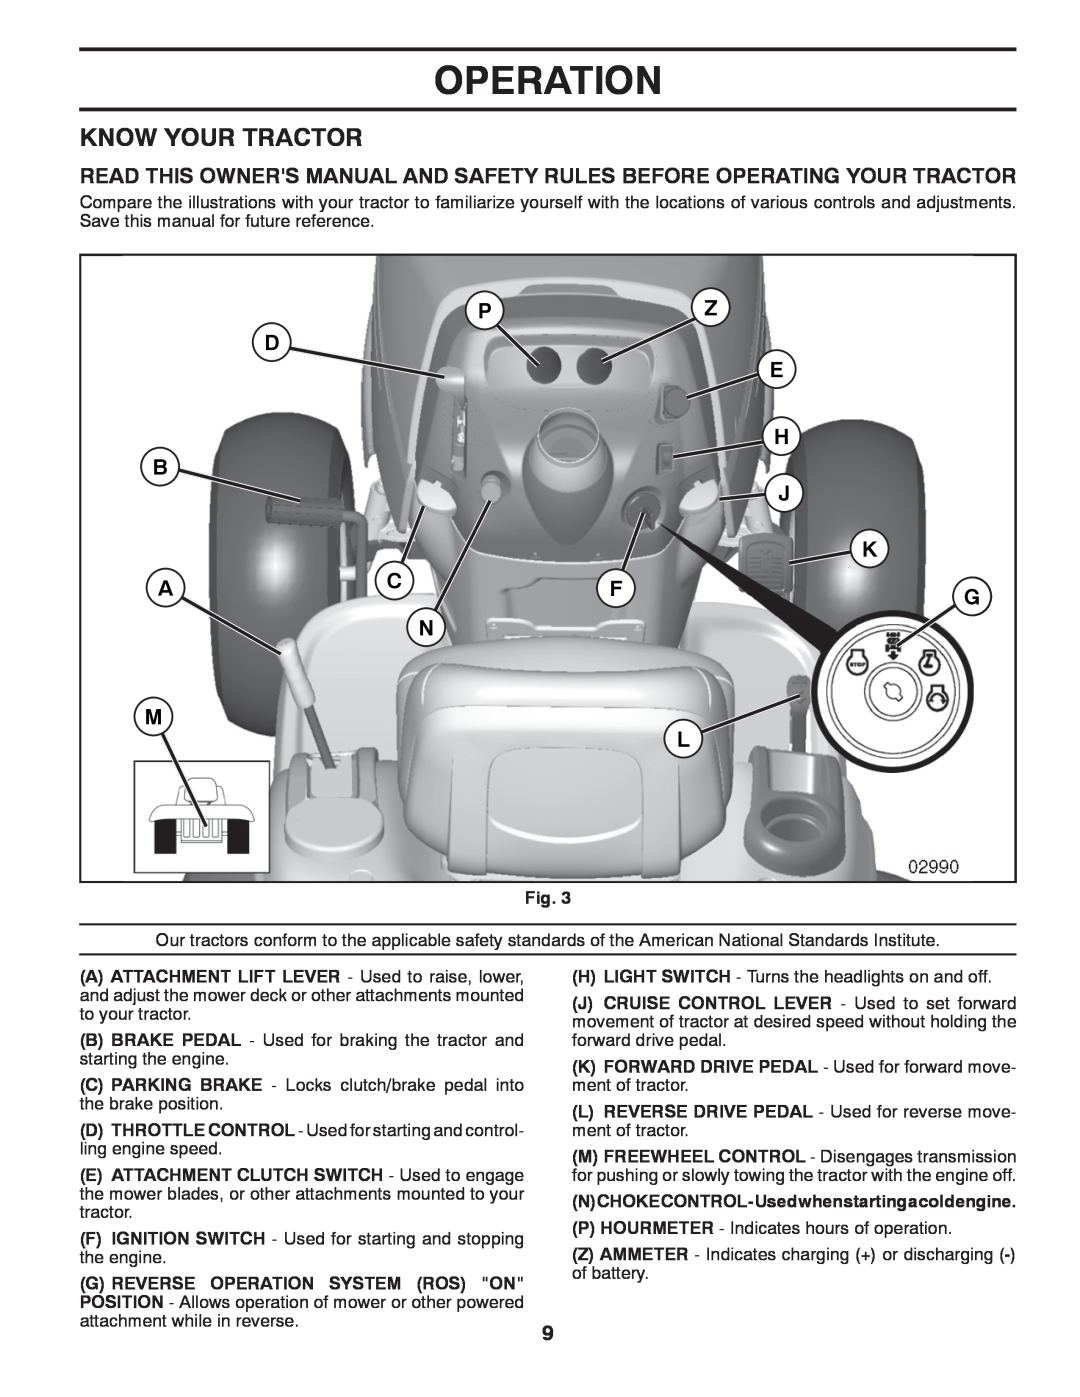 Dixon D22H46, 433616 manual Know Your Tractor, Operation 